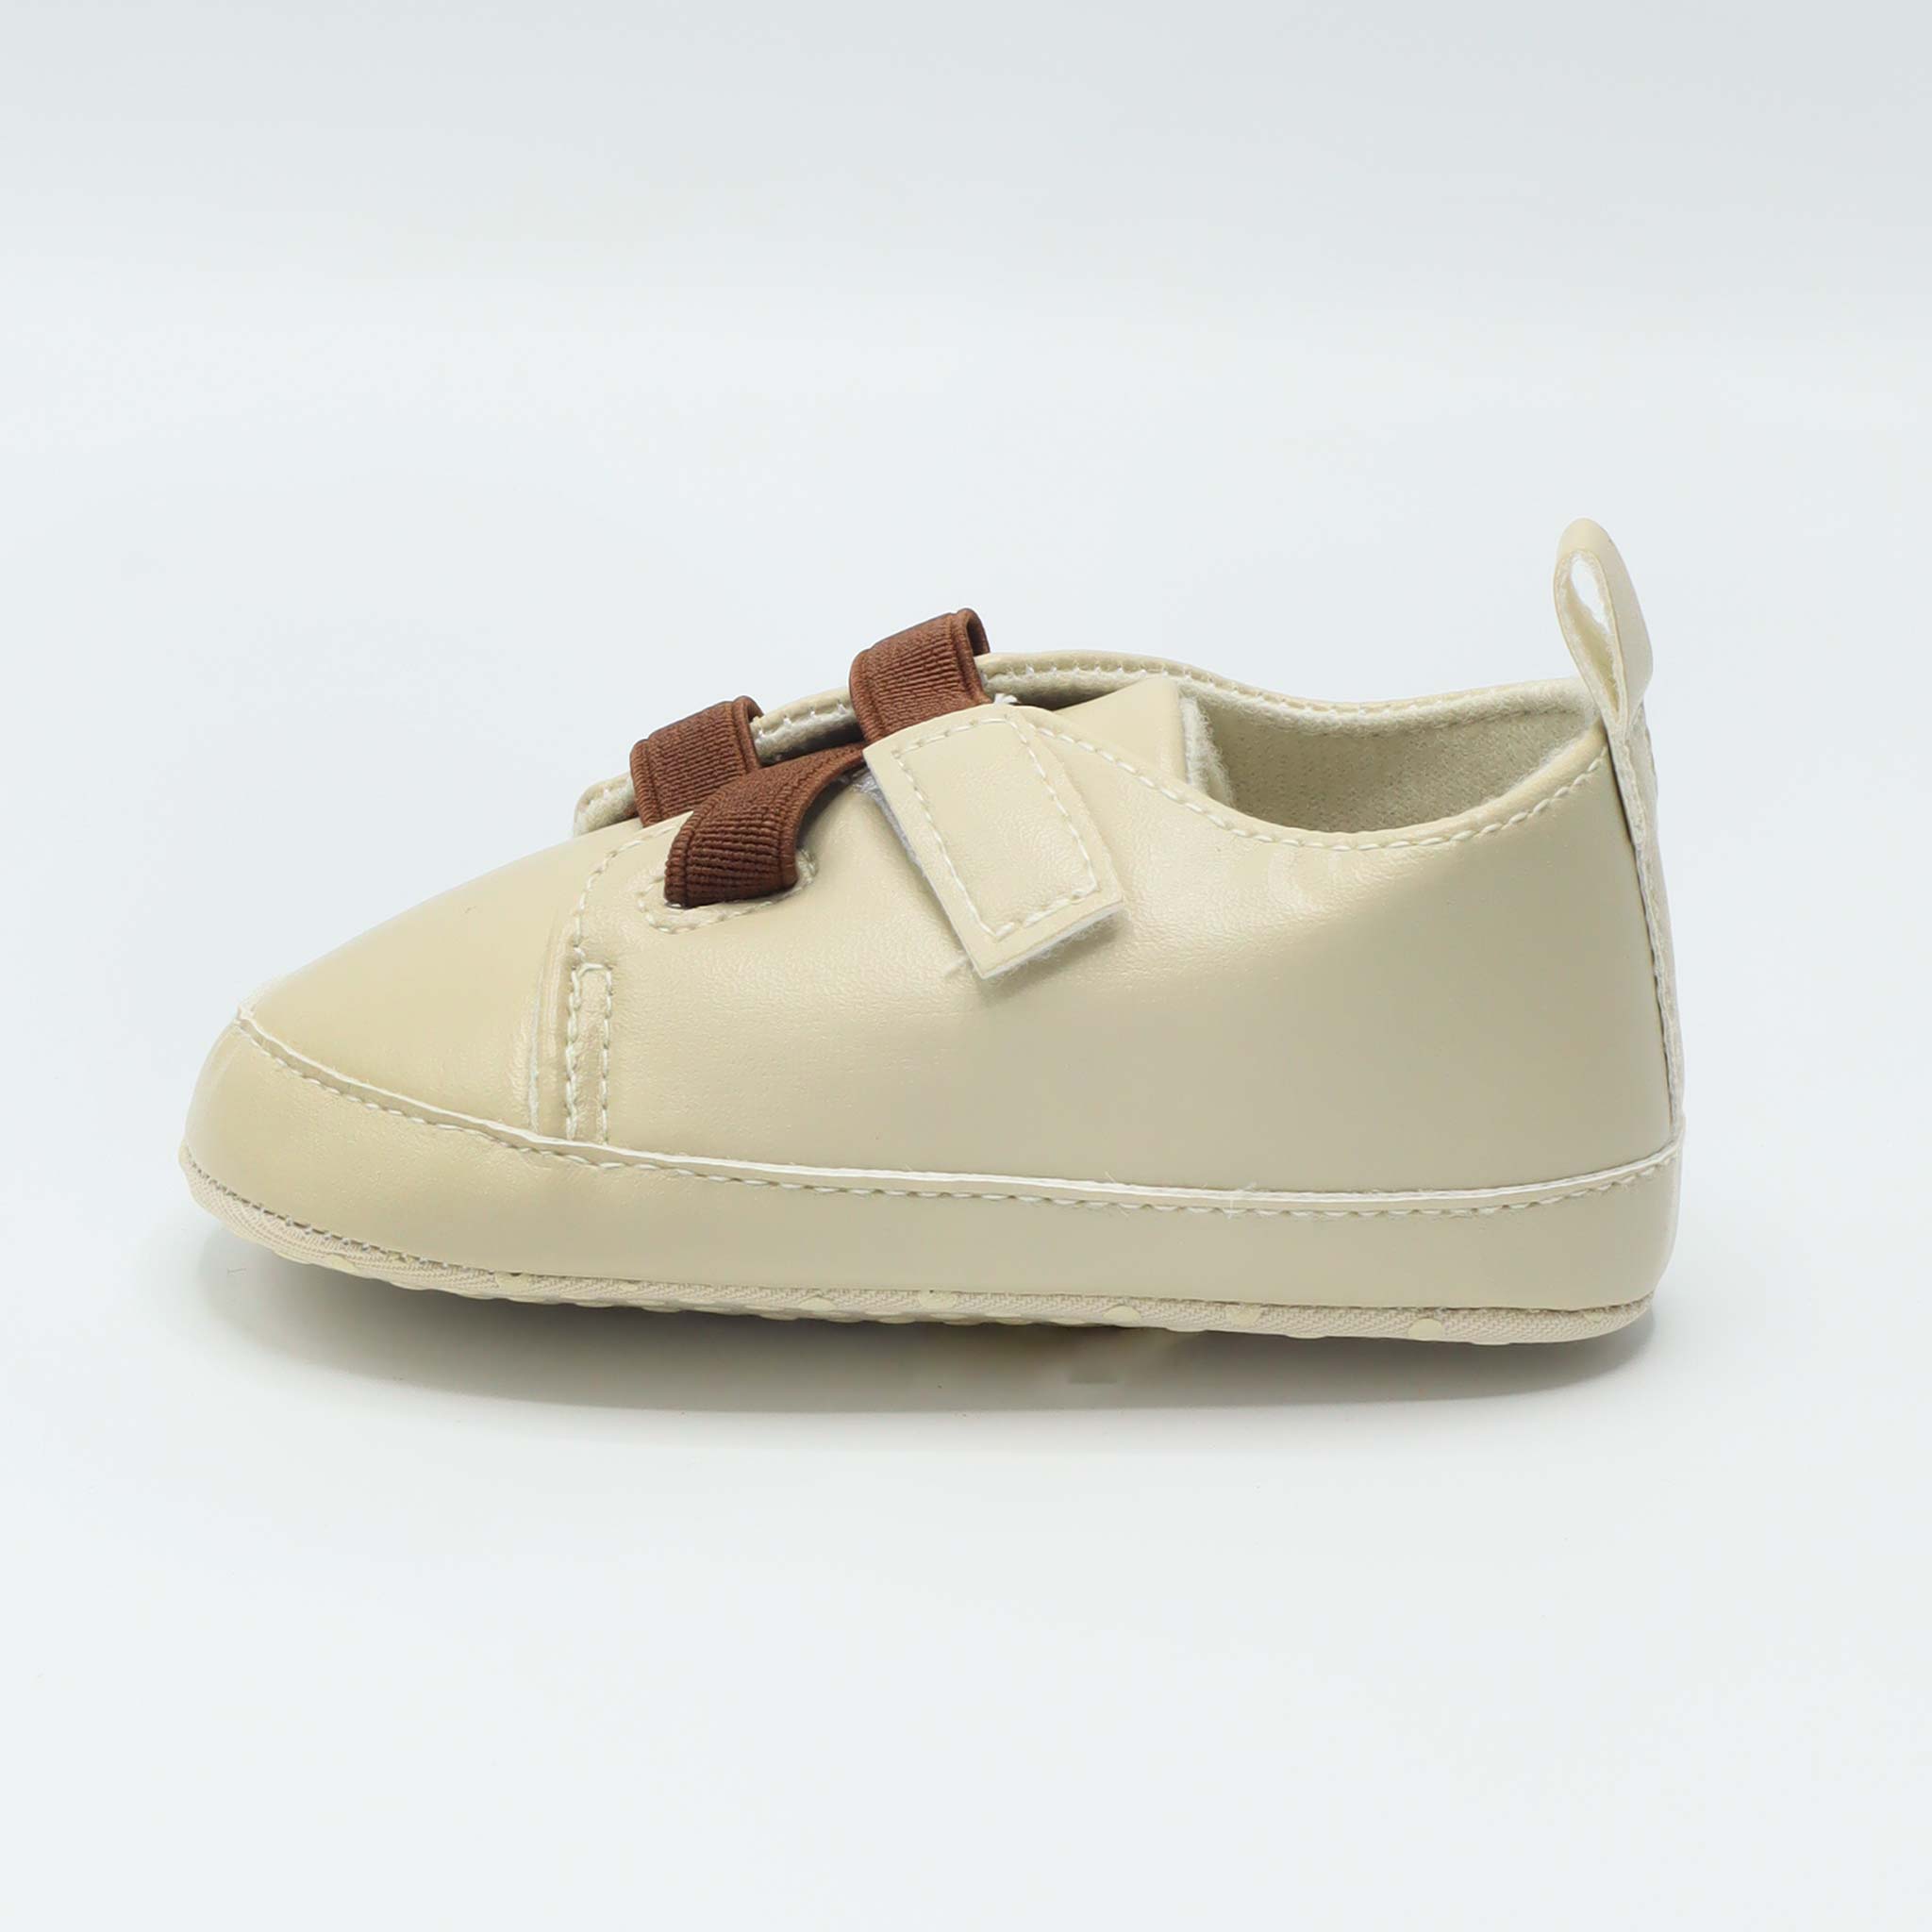 Baby Shoes Cream Color with Brown Laces